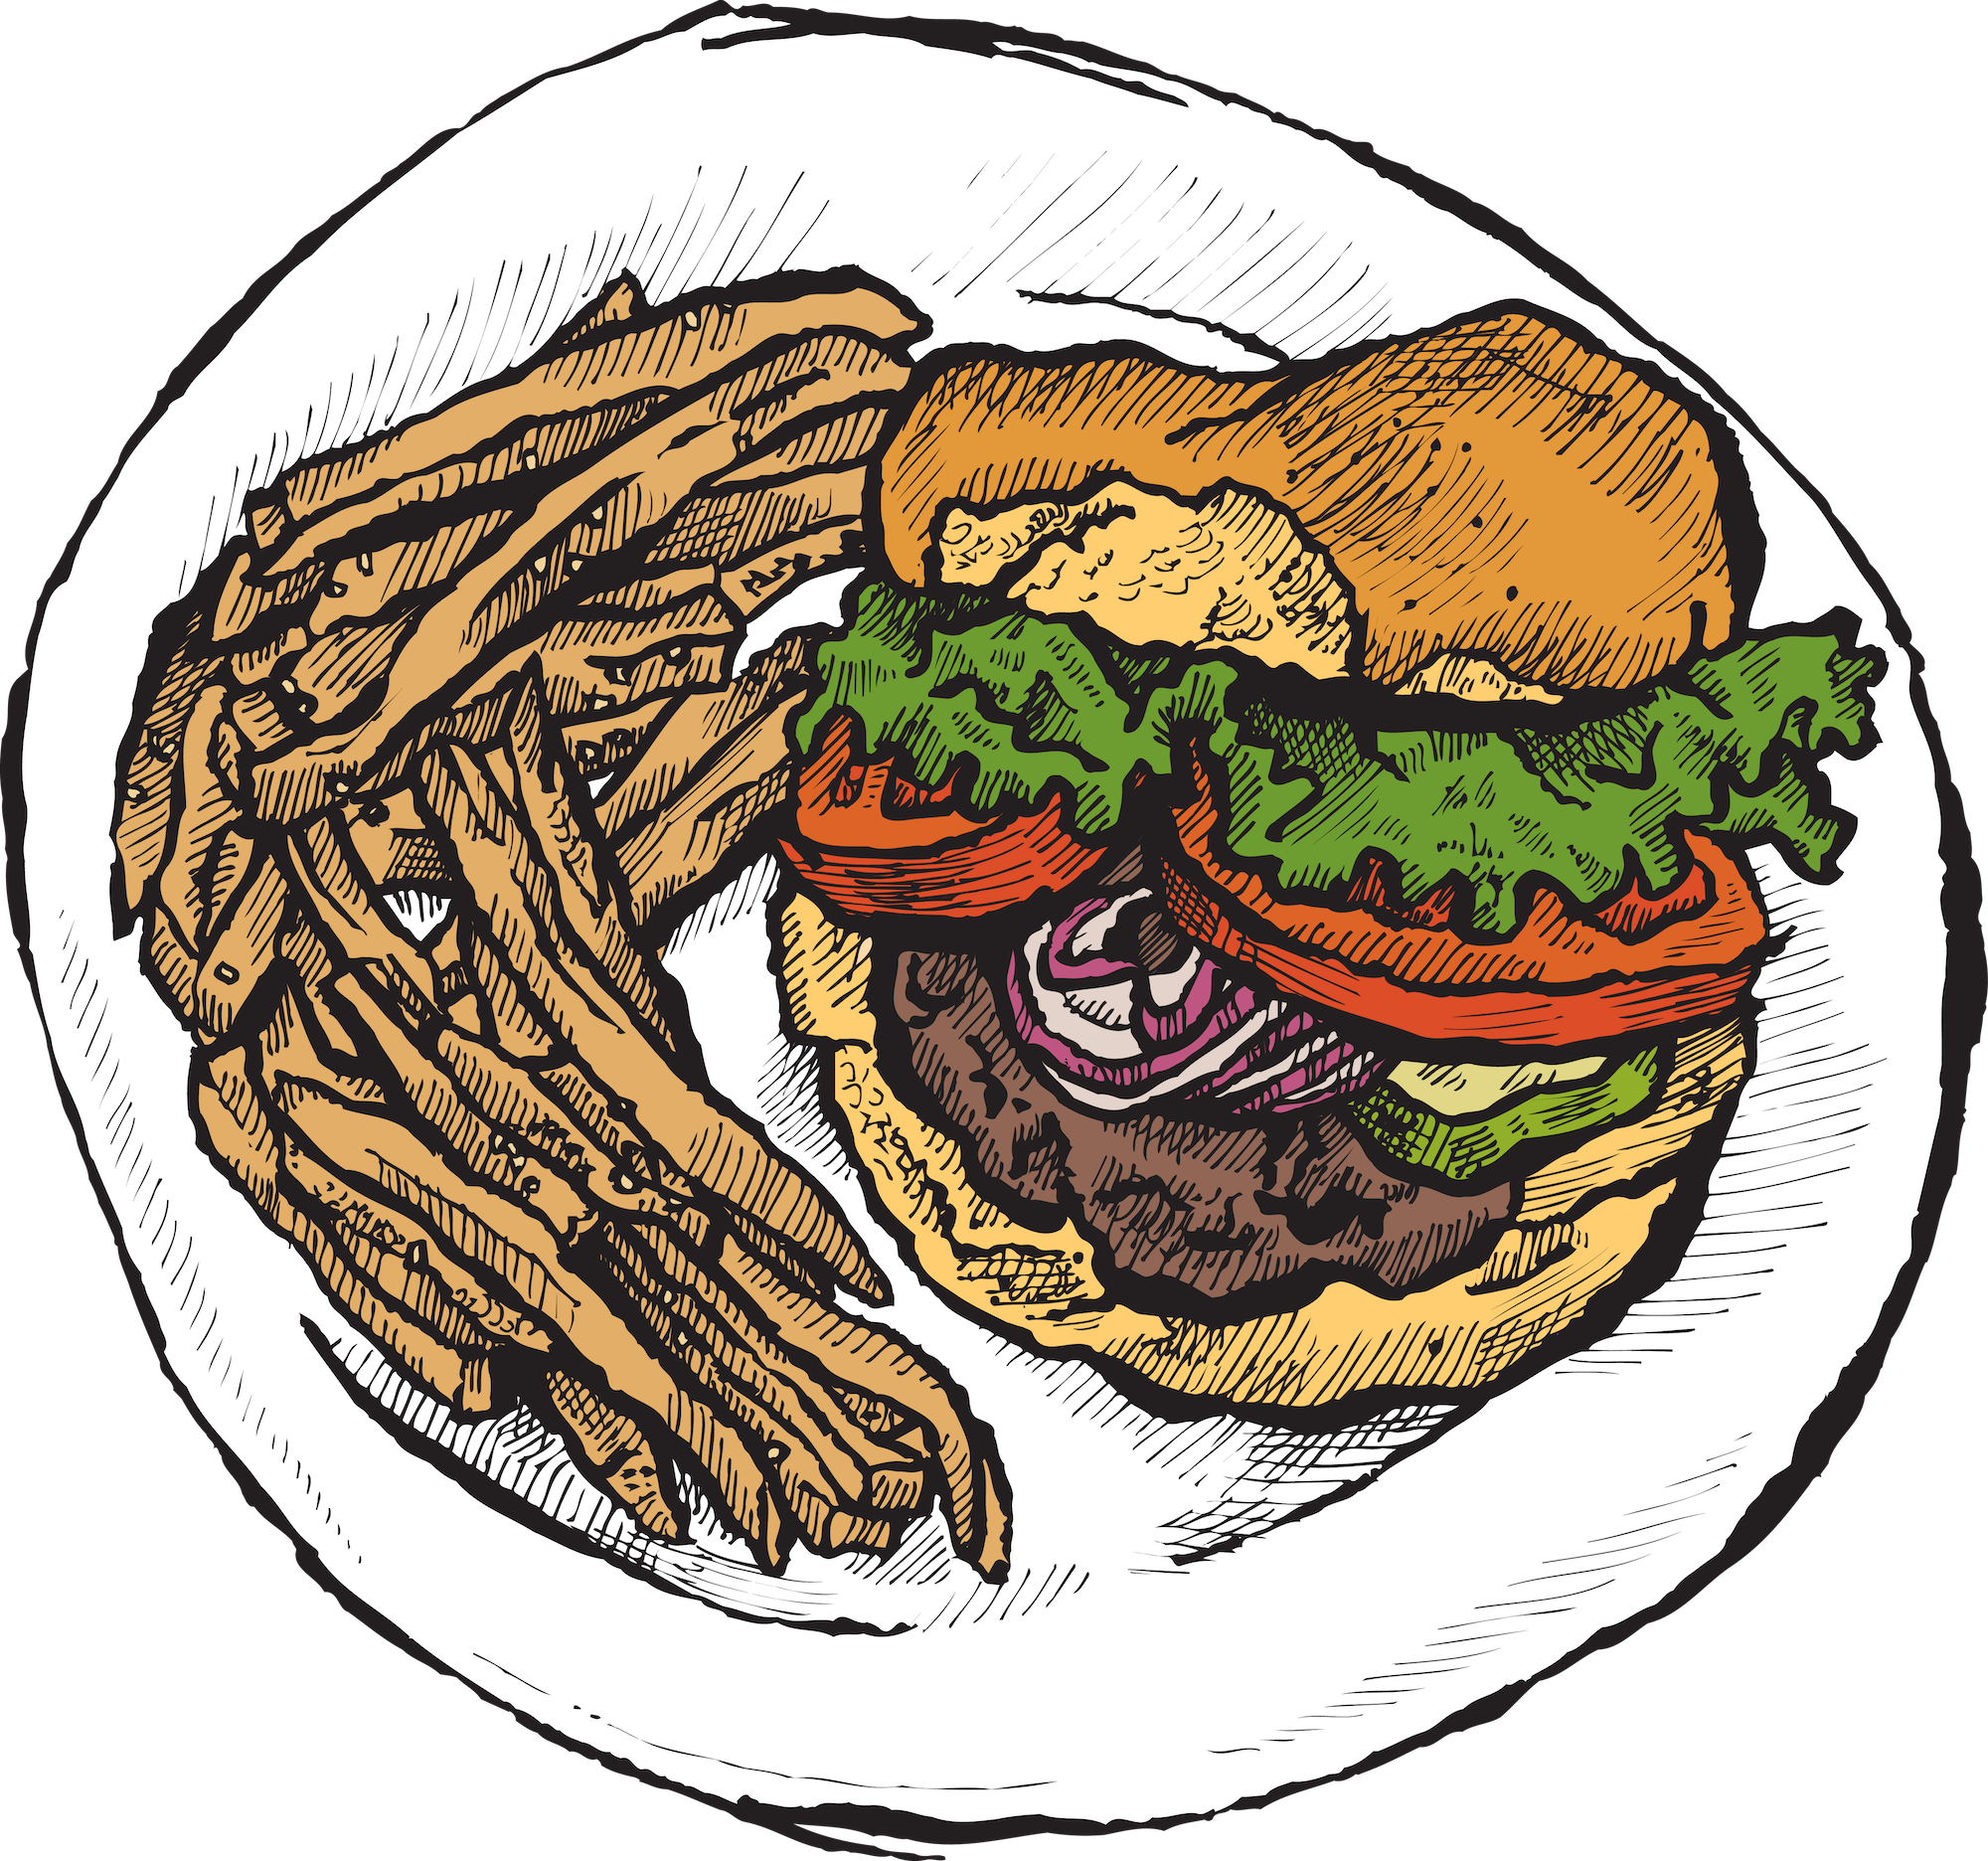 Burger and Fries Illustration on a White Plate. Burger is stuffed with toppings like red onion tomato, lettuce and pickles.